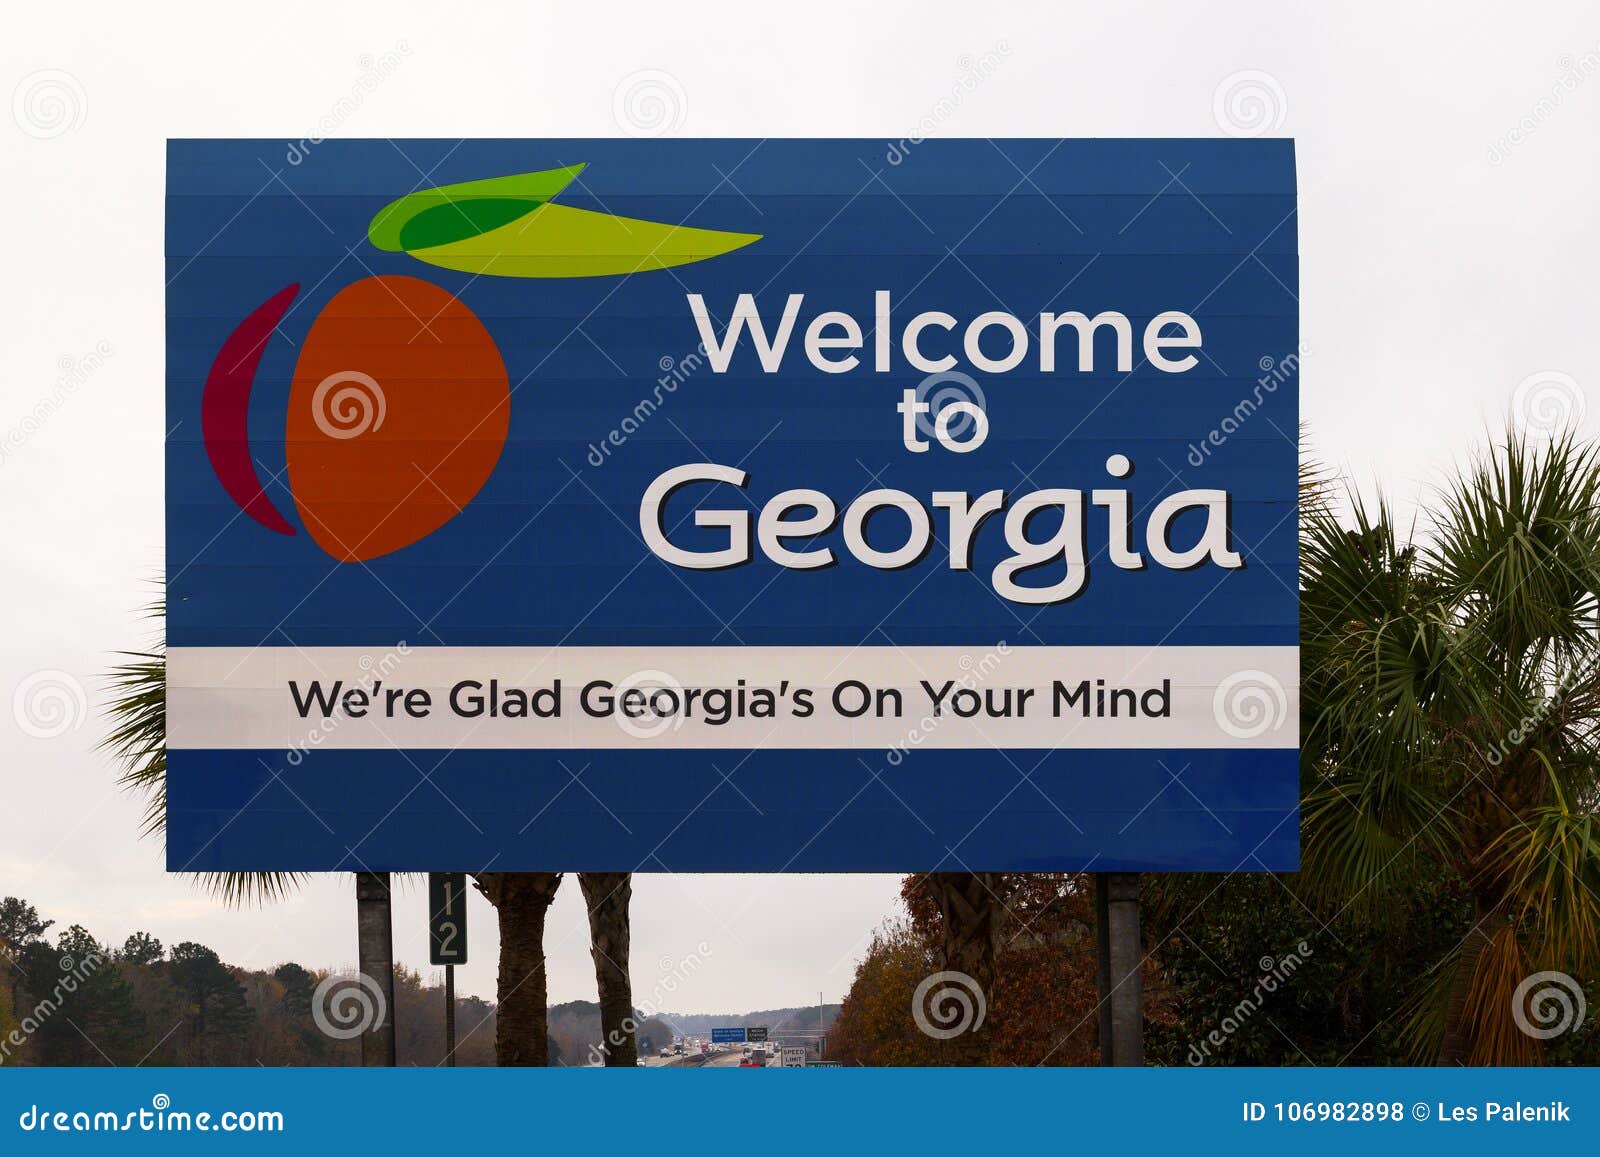 Georgia Welcome Sign Stock Photo Image Of Road Promotion 106982898